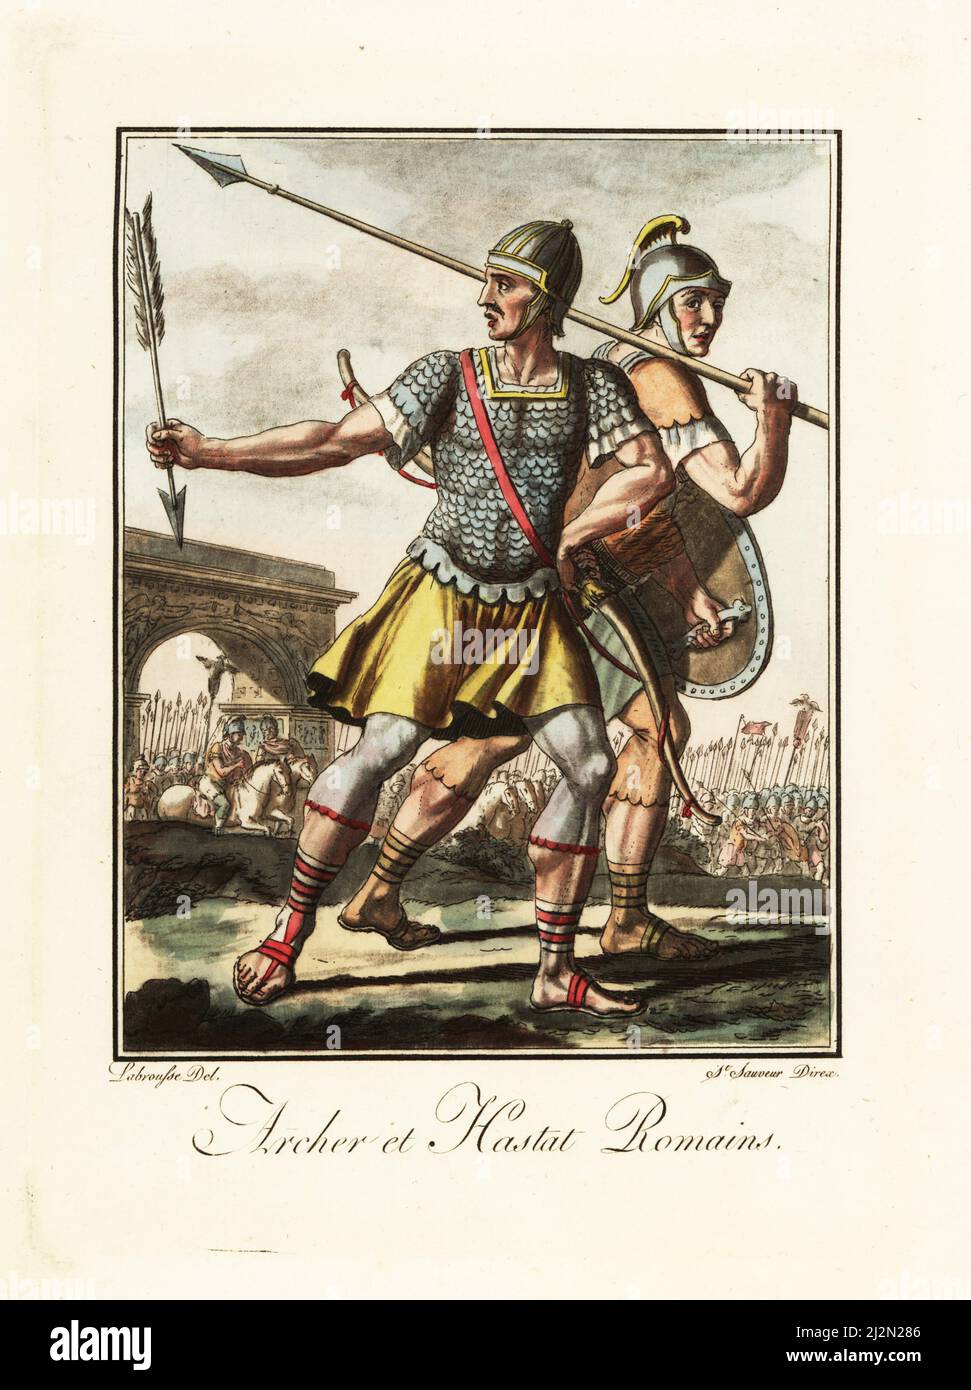 Roman archer sagittarius and spearman hastatus, ancient Rome. Bowman in galea helmet, lorica squamata or scale armour breastplate, tunic, sagulum gregale or short trousers, caligae hobnail sandals, armed with bow and arrow. Lancer armed with oval shield and spear. In the background a triumphal parade. Archer et Hastat Romains. Handcoloured copperplate drawn and engraved by L. Labrousse, artist of Bordeaux, under the direction of Jacques Grasset de Saint-Sauveur from his L’antique Rome, ou description historique et pittoresque, Ancient Rome, or historical and picturesque description, Chez Deroy Stock Photo